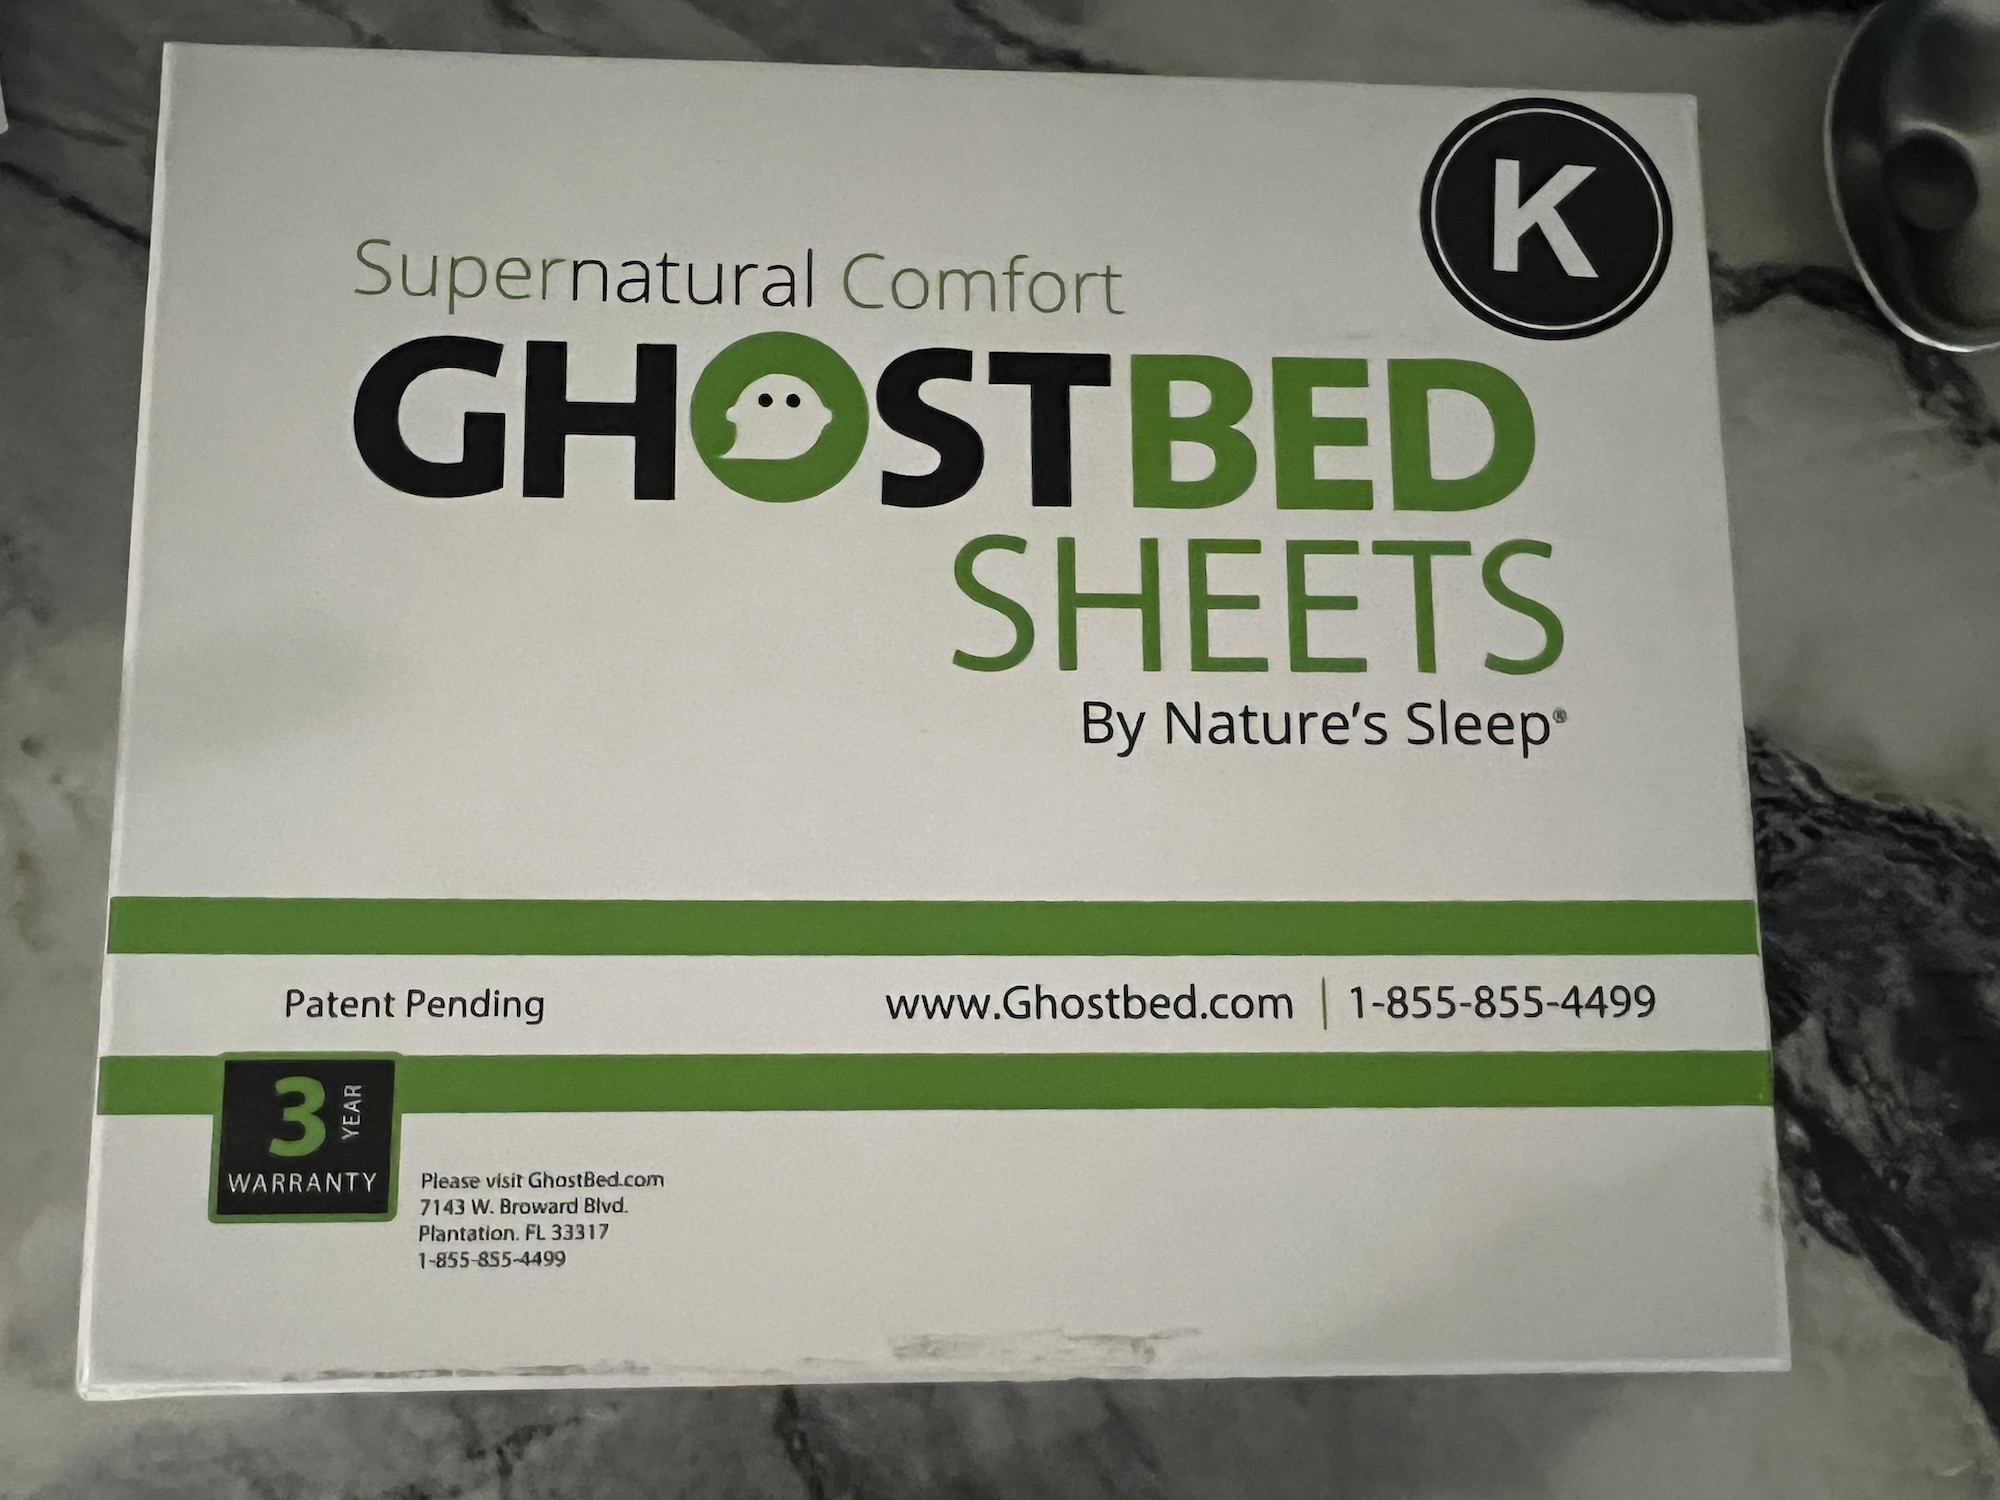 Ghostbed Sheets by Nature's Sleep for Dreamcloud mattress